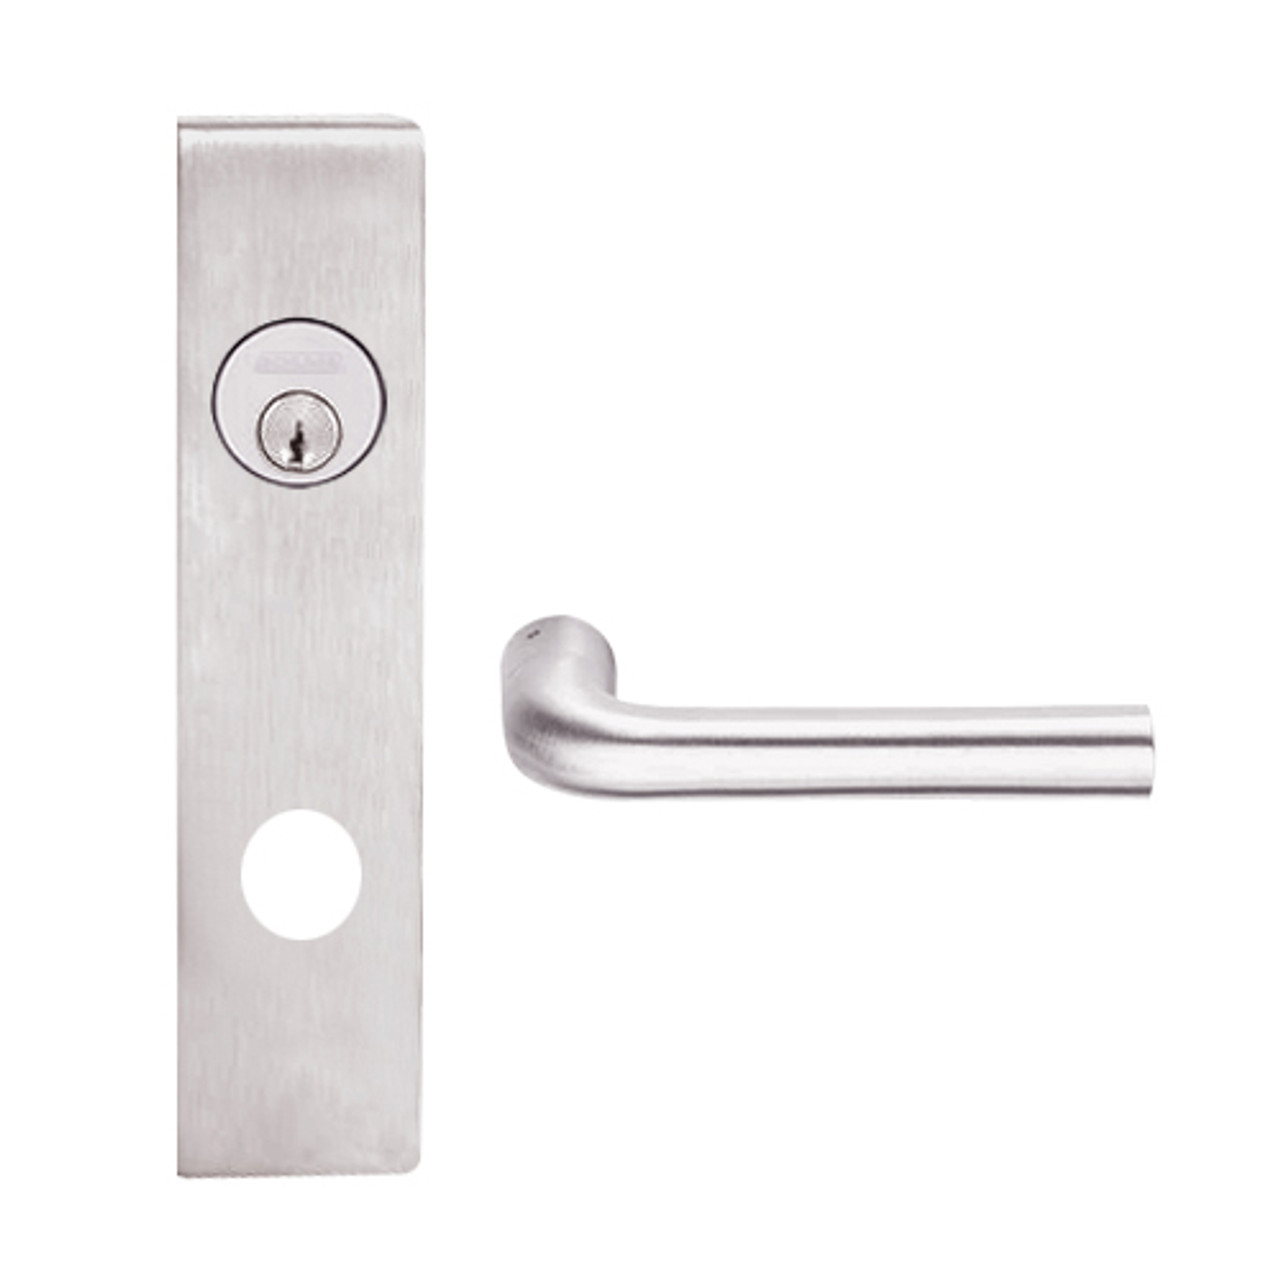 L9456L-02L-629 Schlage L Series Less Cylinder Corridor with Deadbolt Commercial Mortise Lock with 02 Cast Lever Design in Bright Stainless Steel